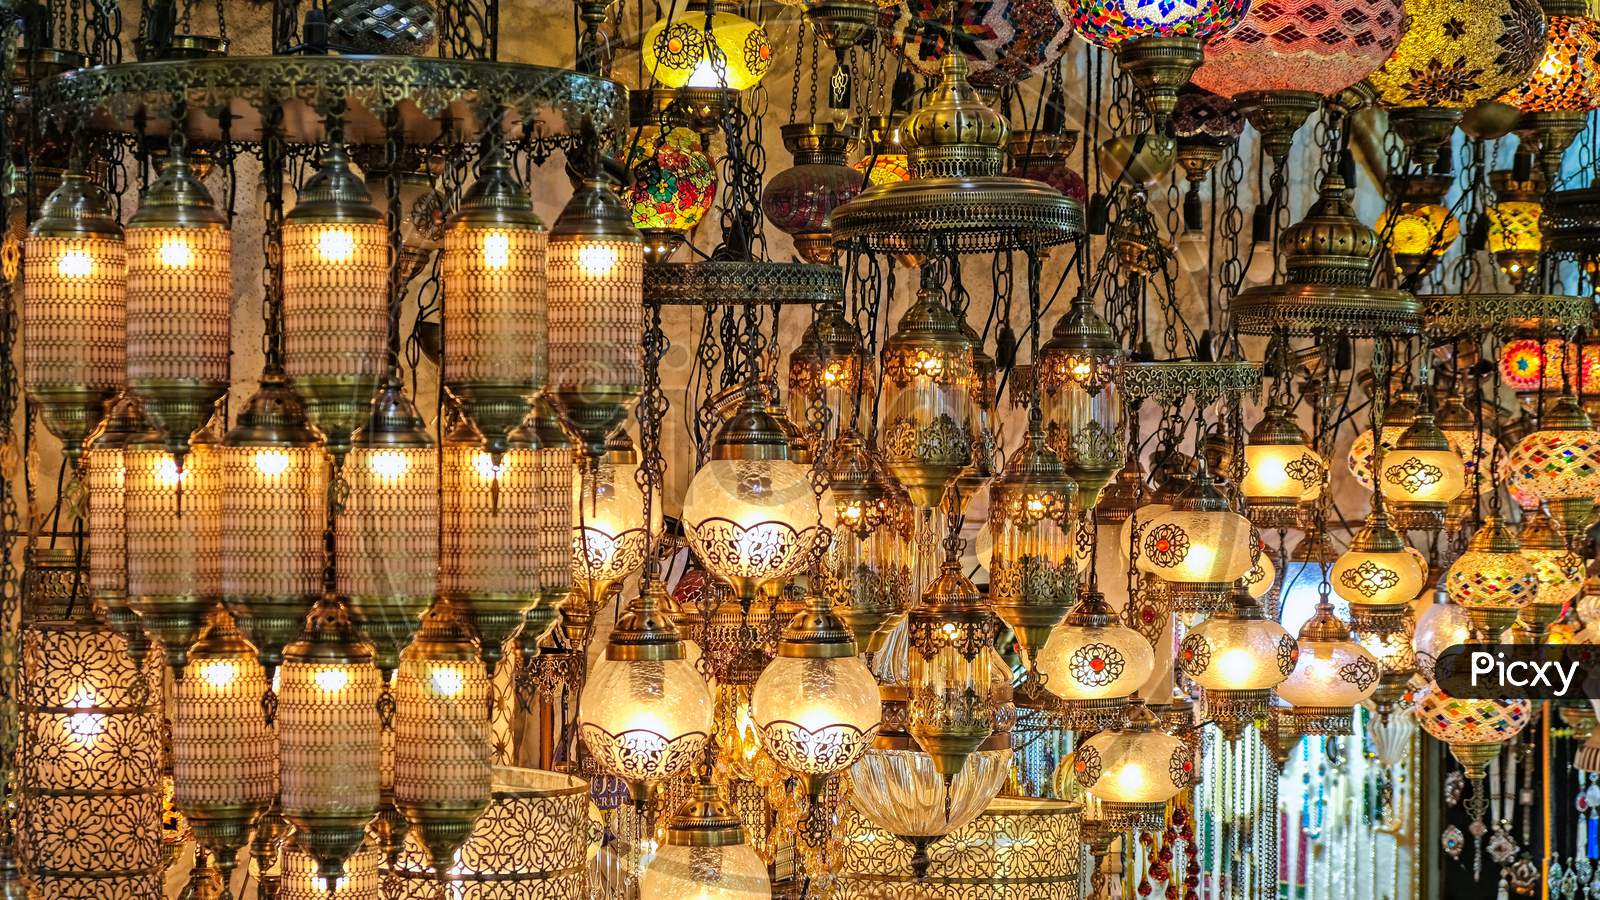 Istanbul, Turkey - May 25 : Lights For Sale In The Grand Bazaar In Istanbul Turkey On May 25, 2018